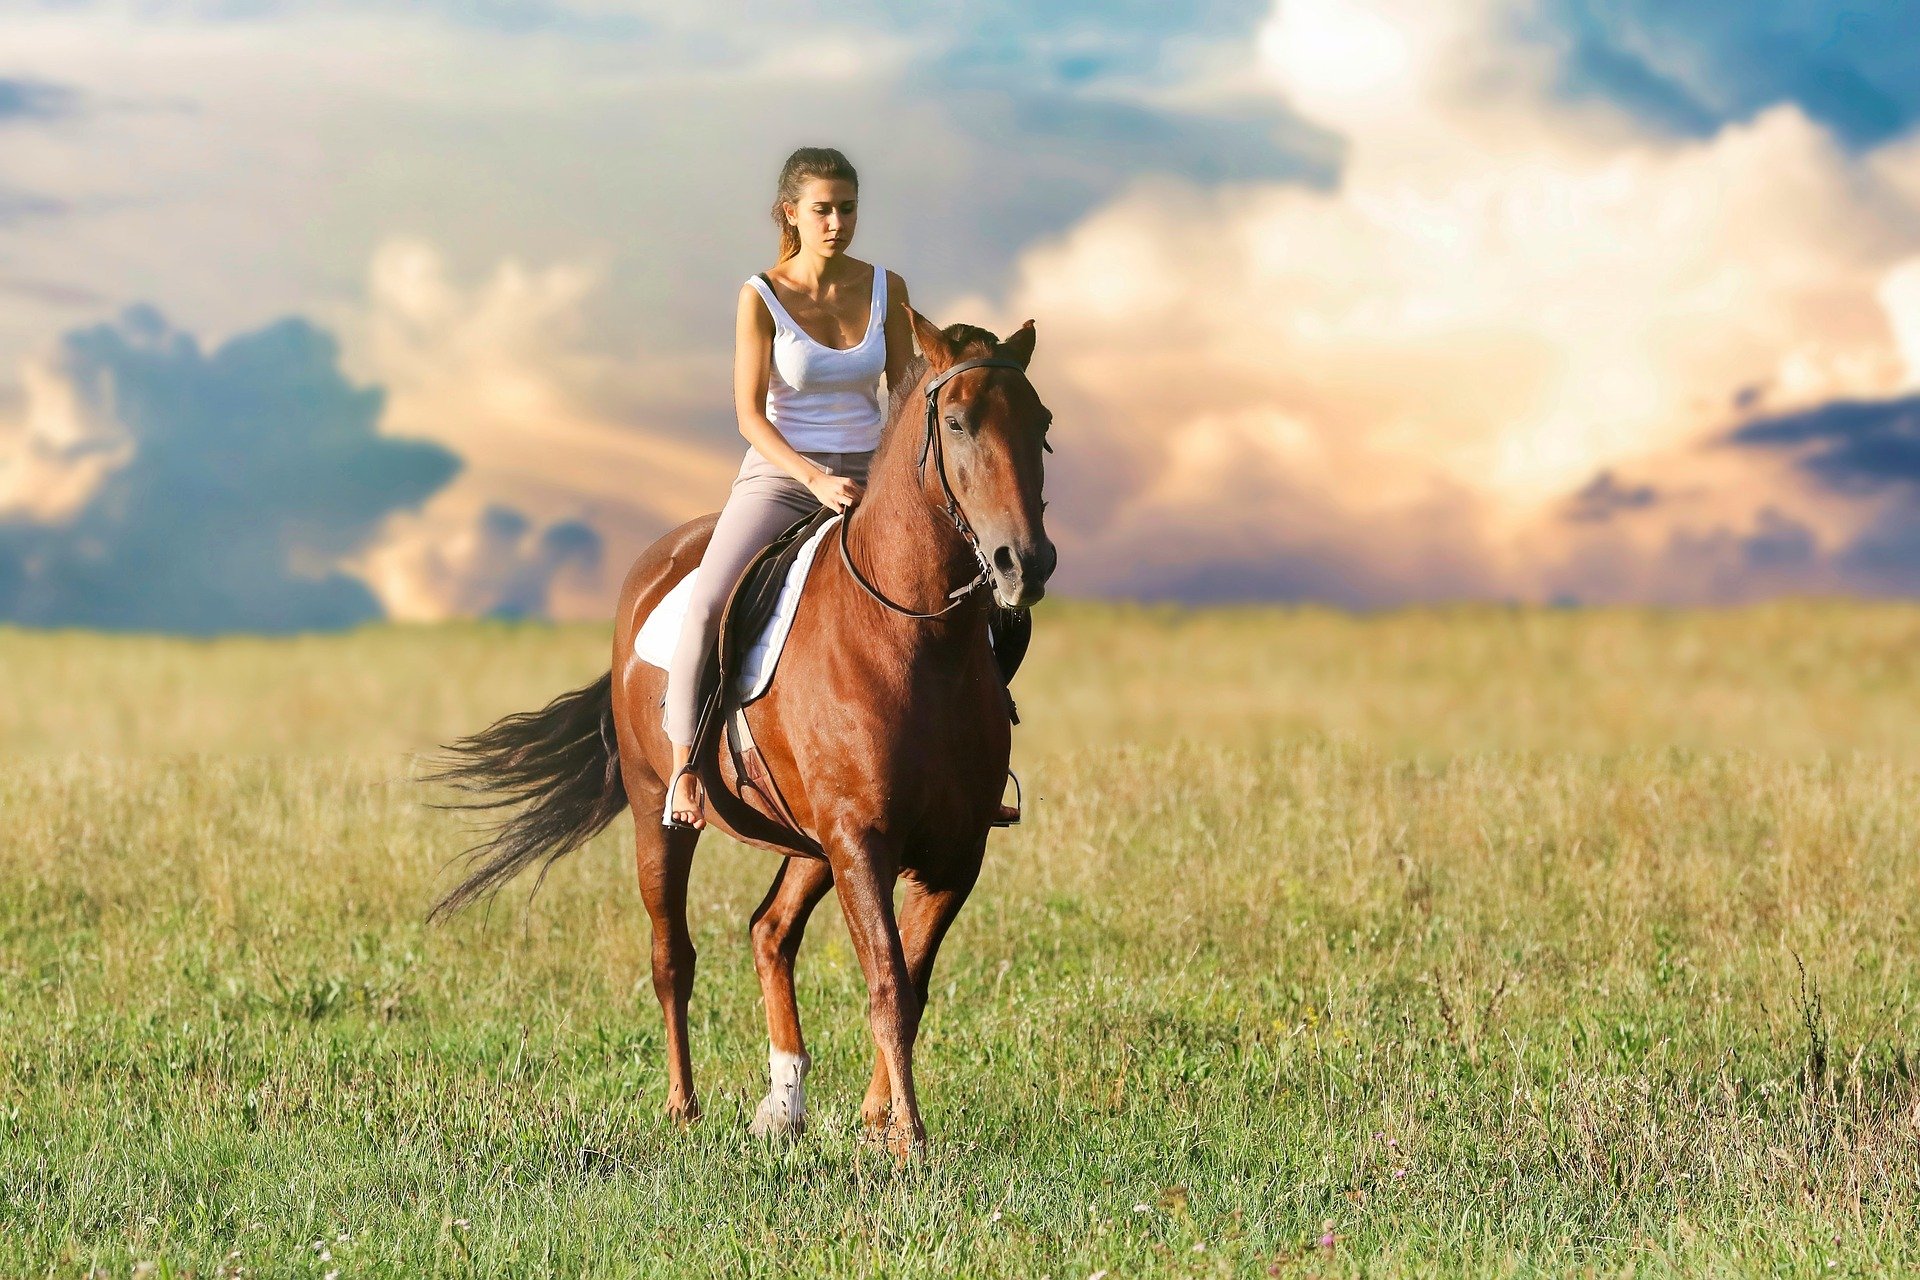 Pictured - A woman riding a horse out in the field | Source: Pixabay 